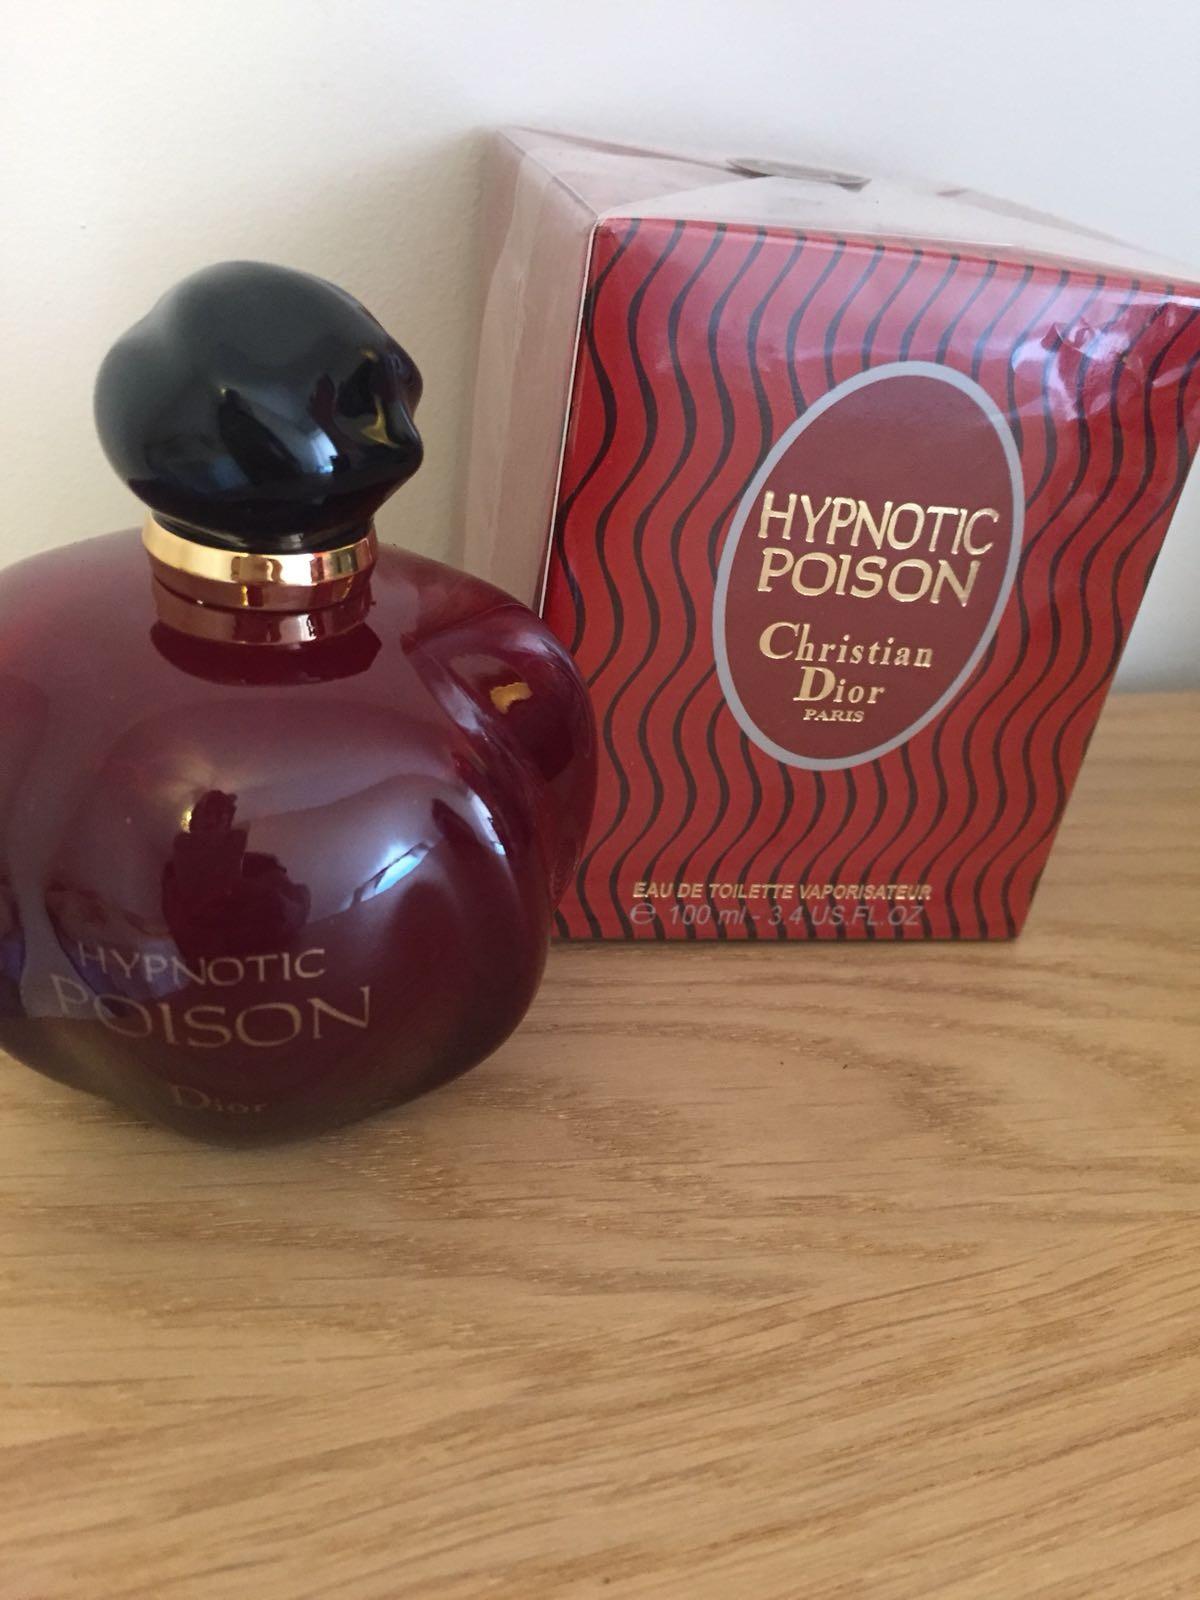 Limited Time Deals New Deals Everyday Christian Dior Poison Hypnotic Off 78 Buy